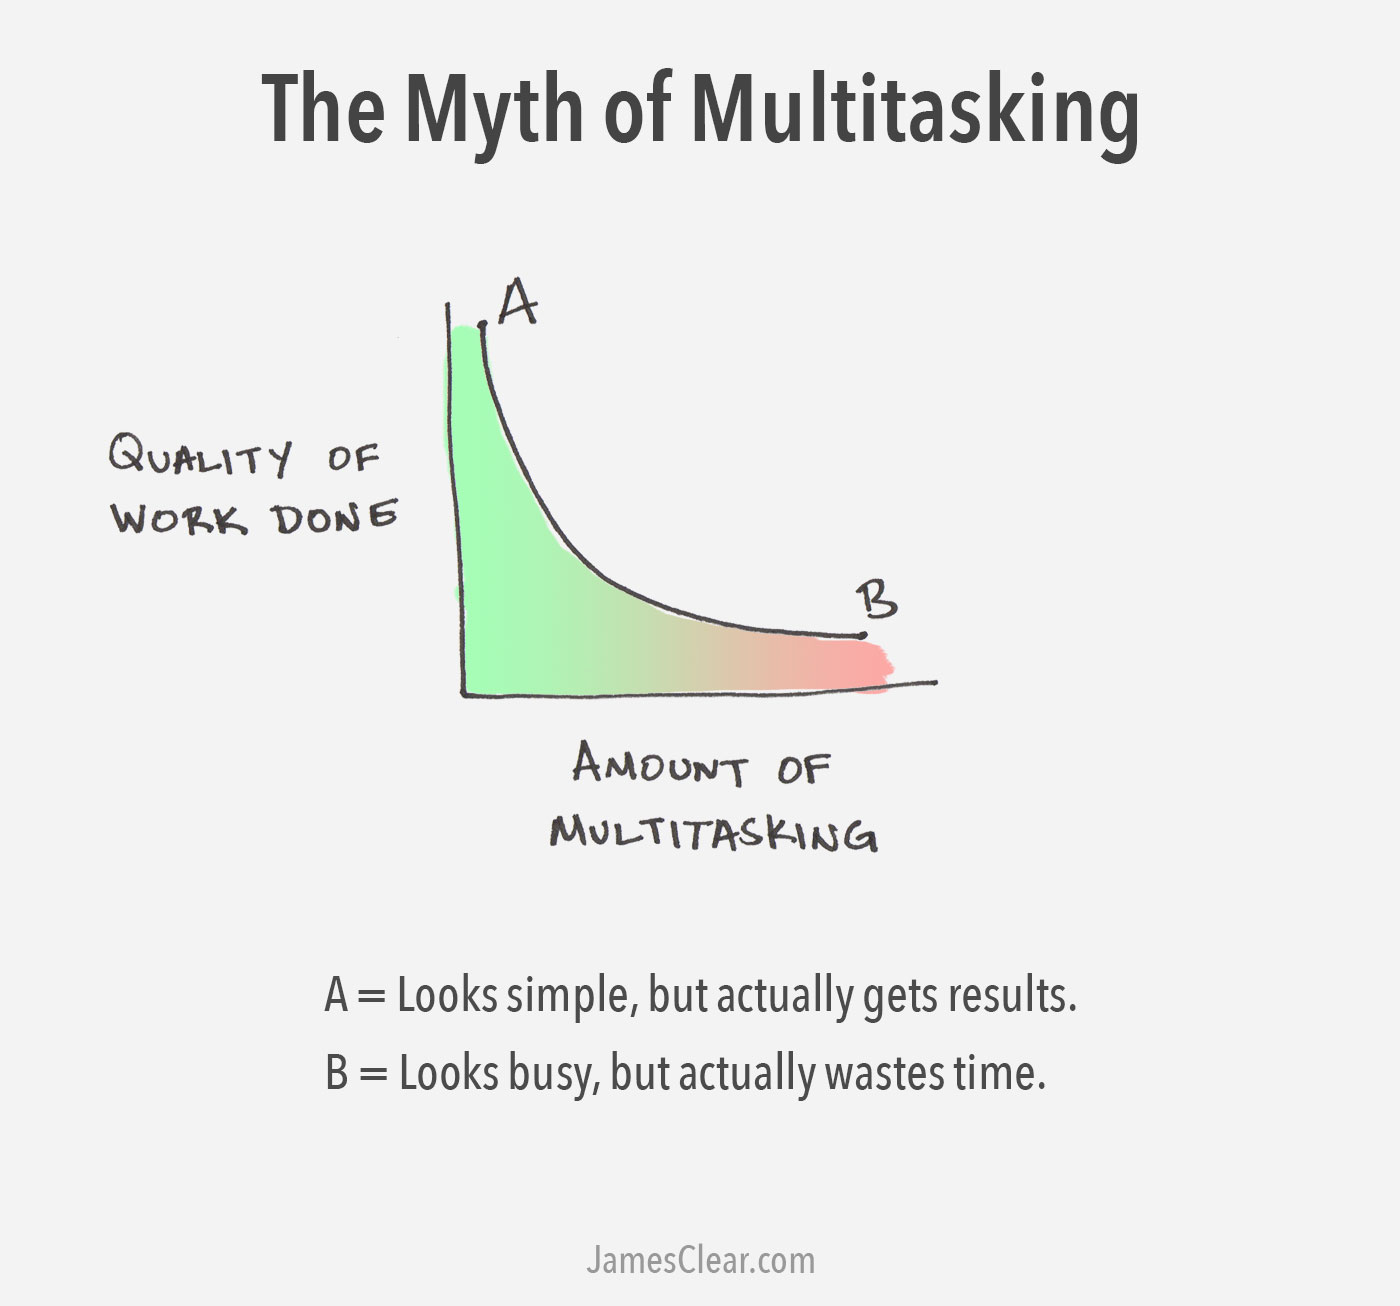 The myth of multitasking is that it will make you more effective. In reality, remarkable focus is what makes the difference. (Image inspired by Jessica Hagy.)